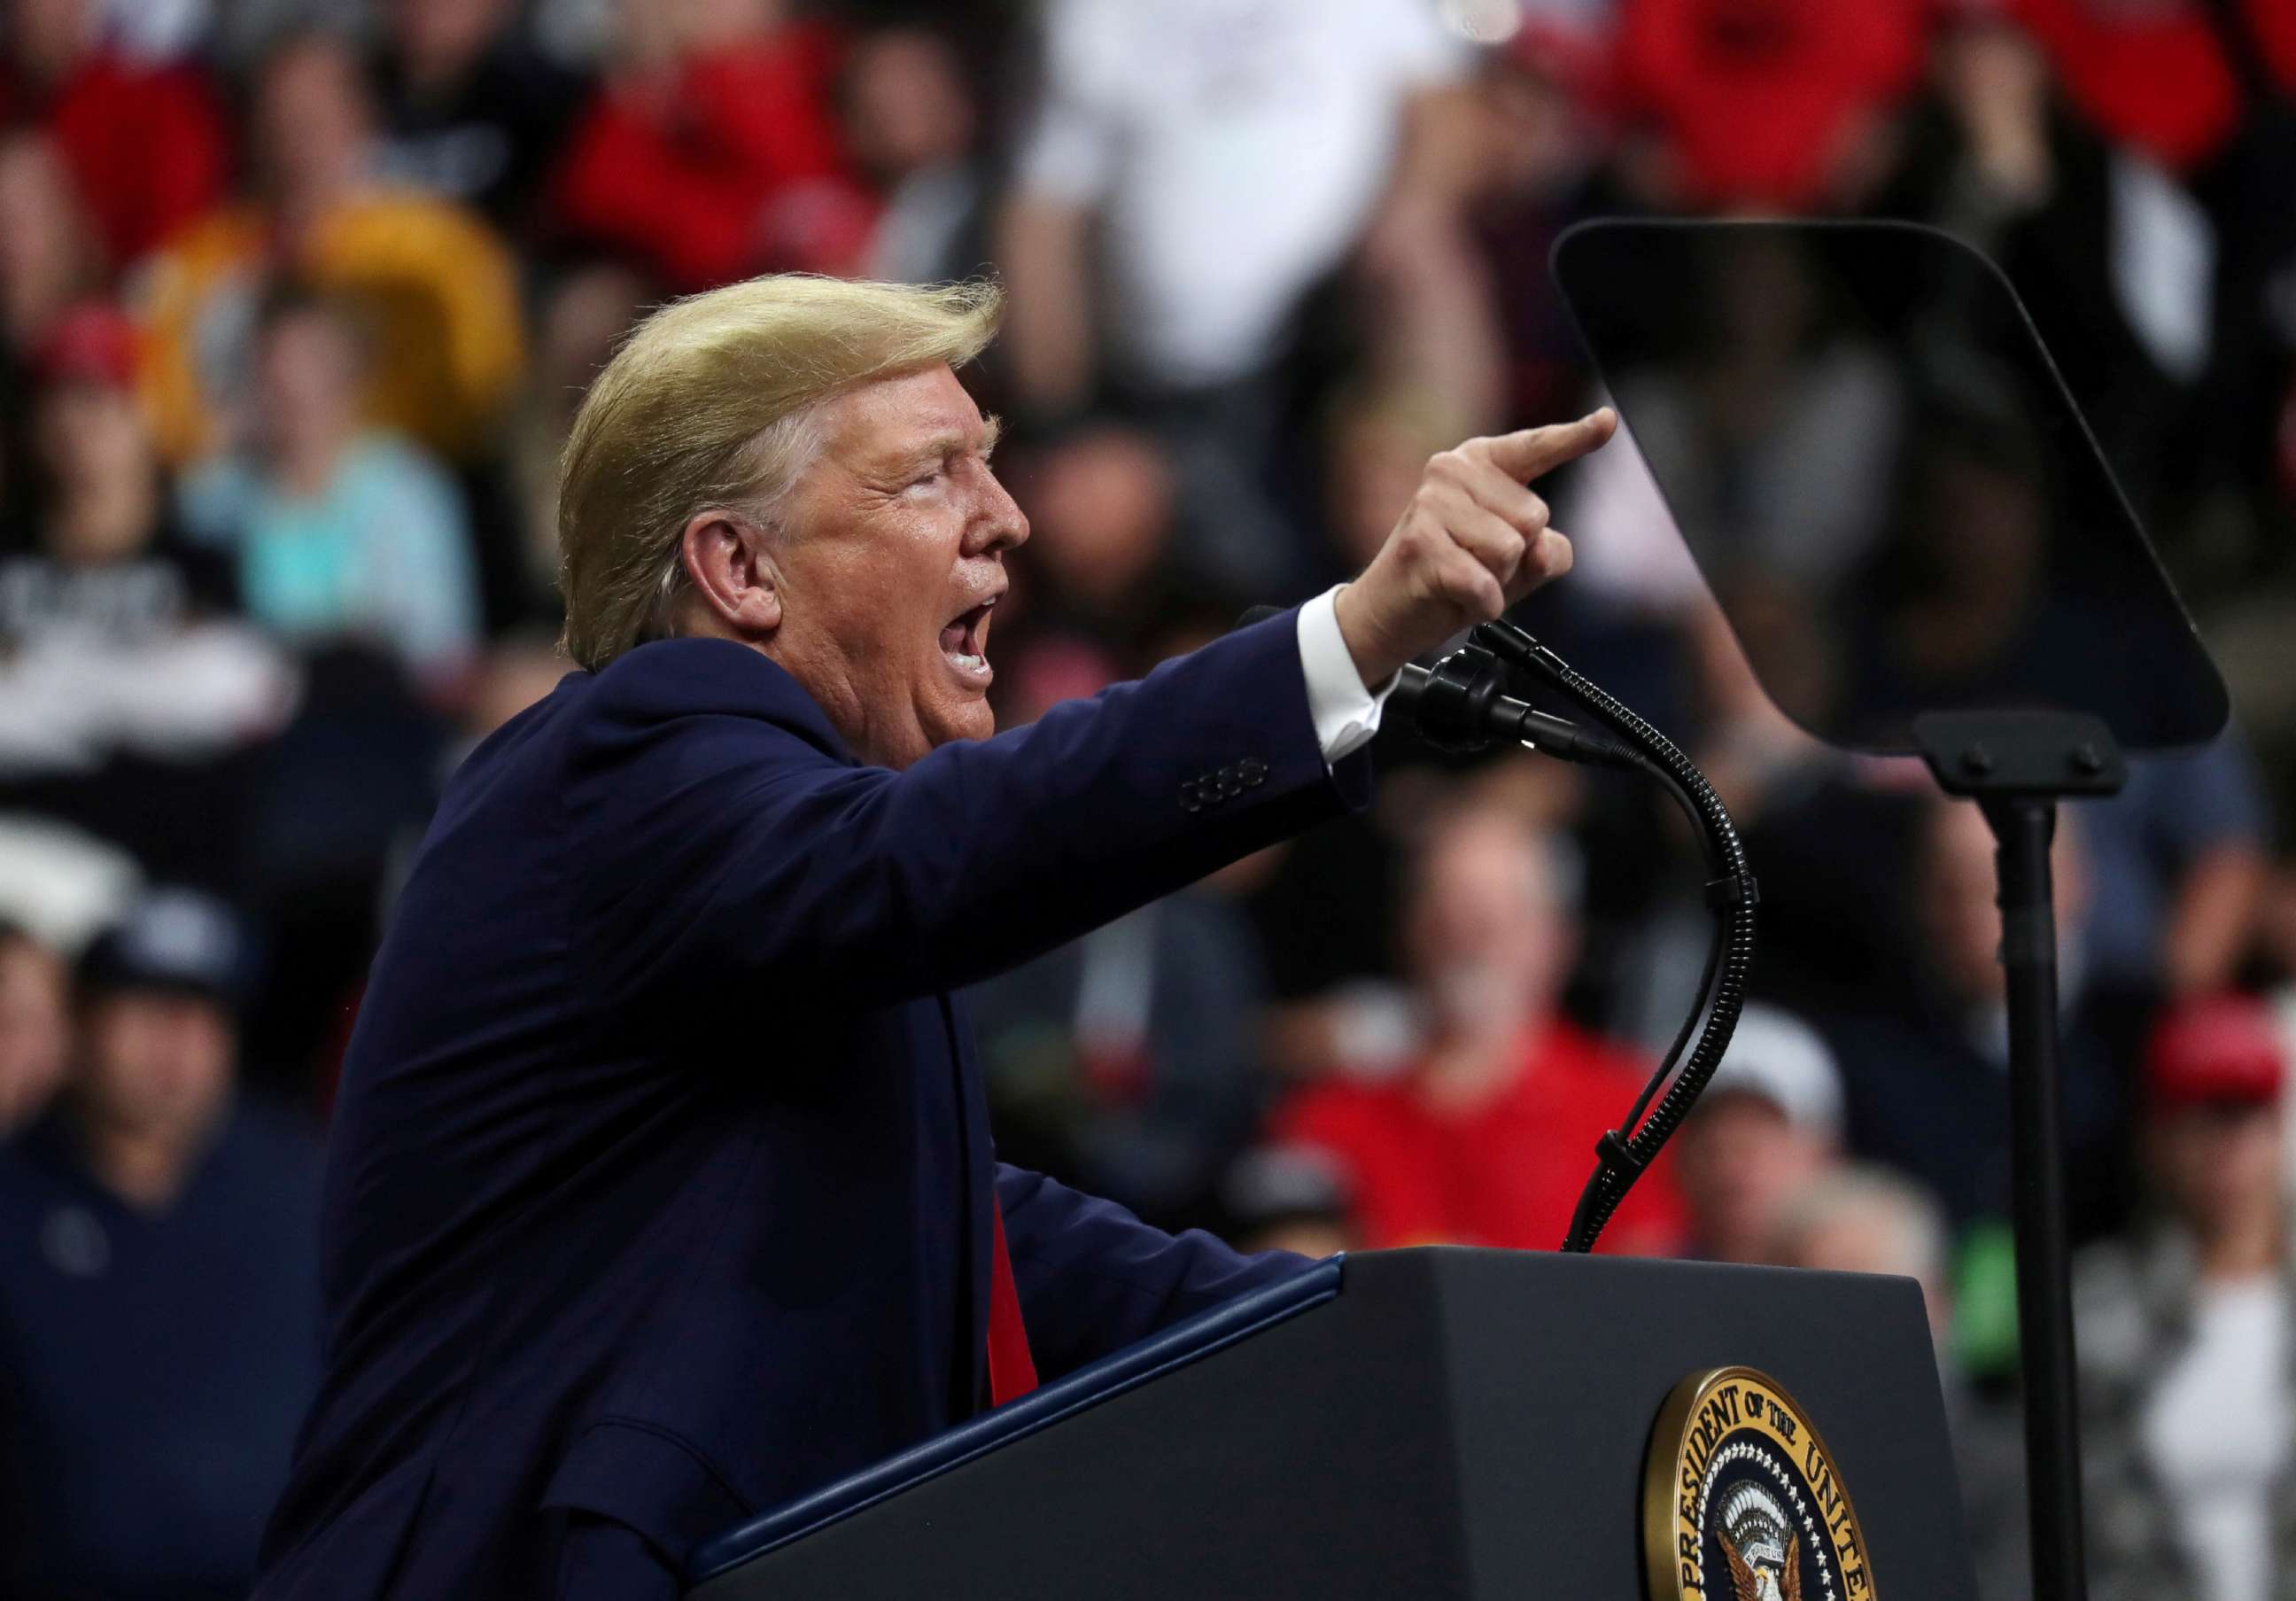 PHOTO: President Donald Trump holds a campaign rally in Minneapolis, Minn., Oct. 10, 2019.